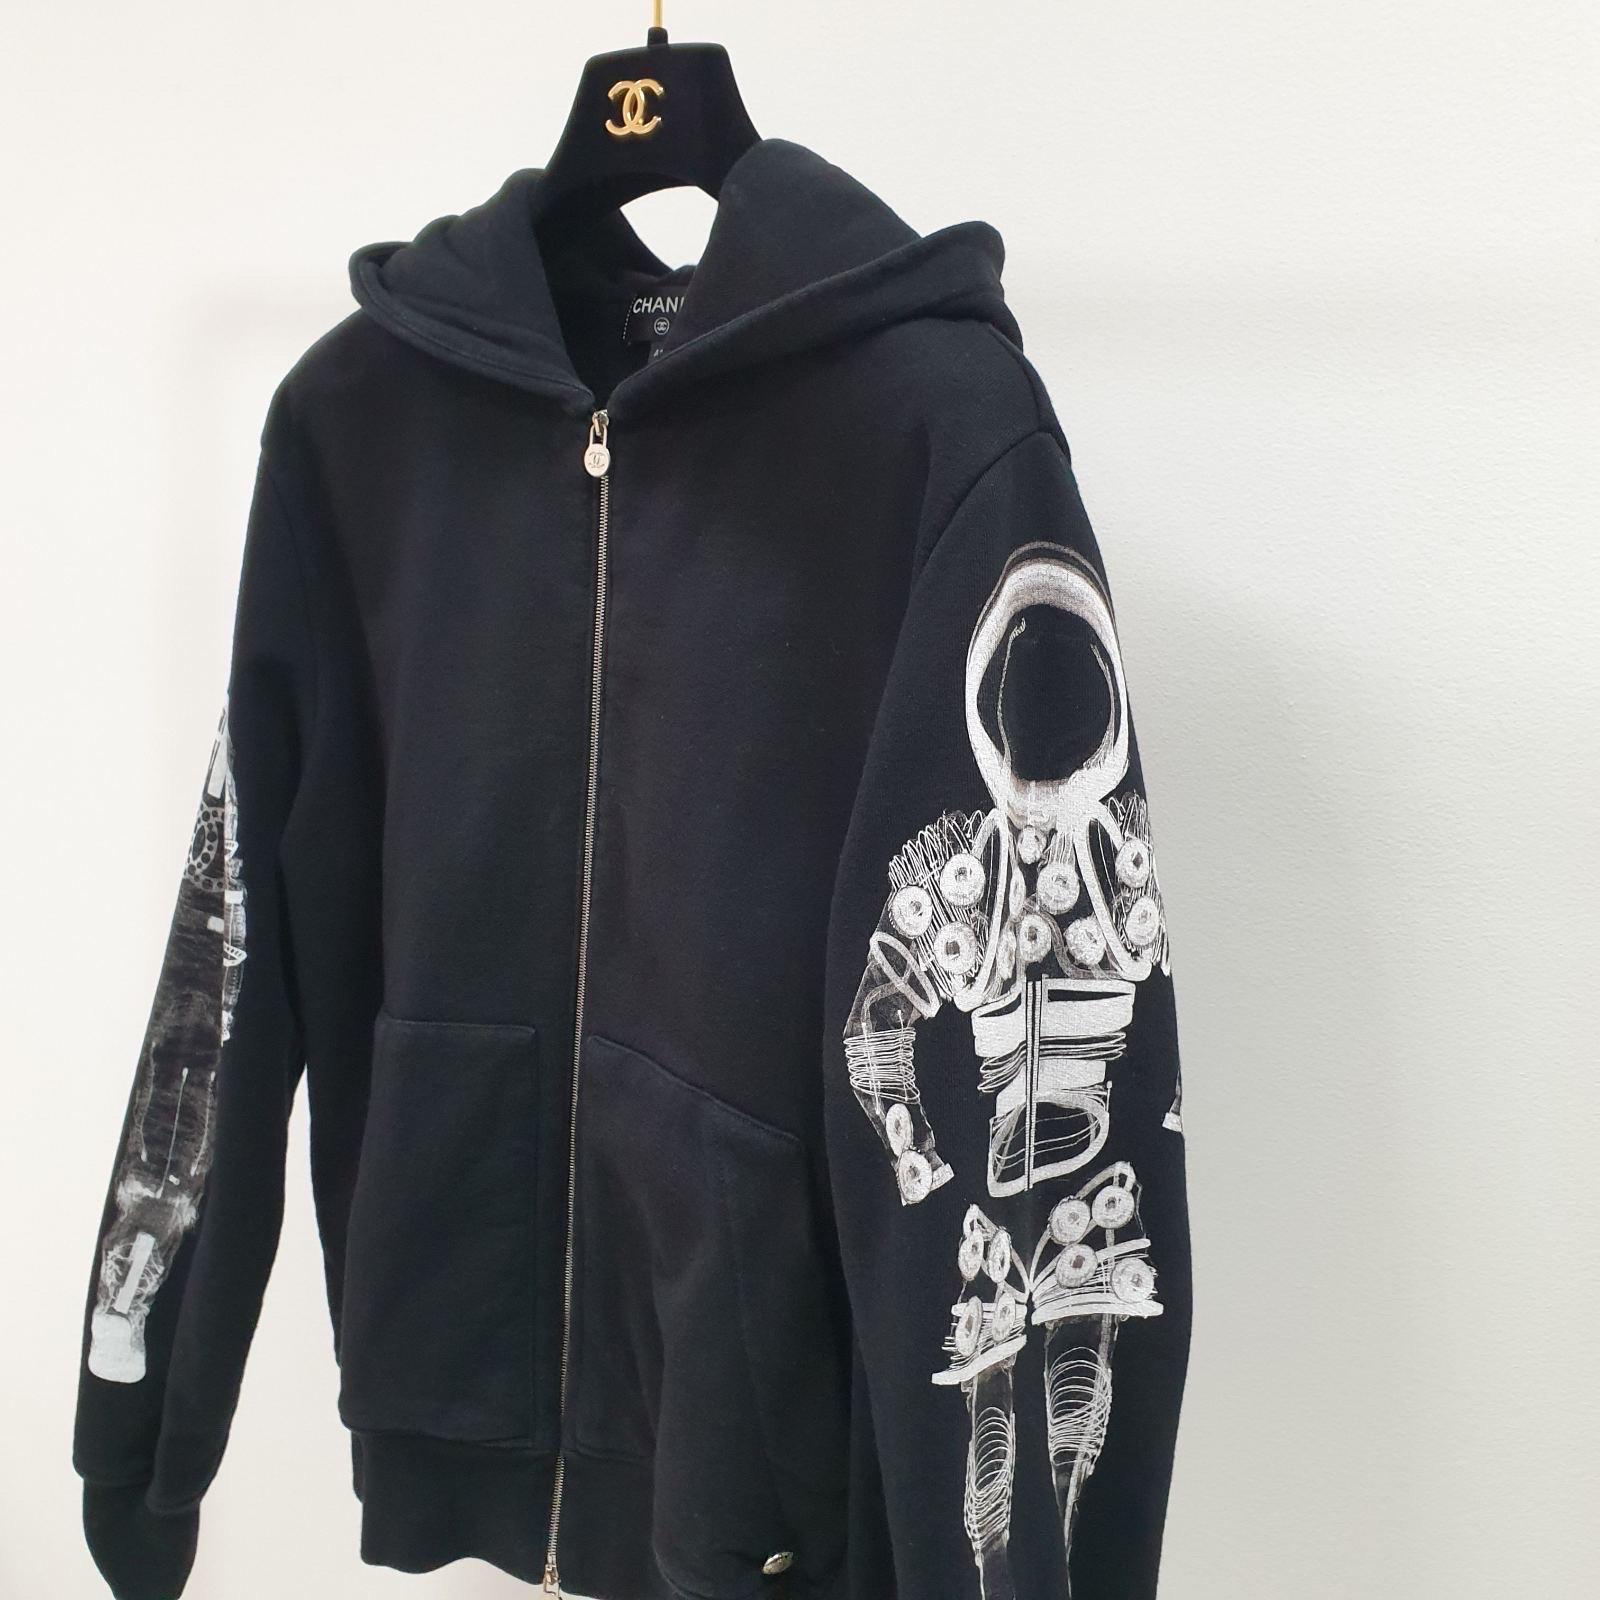 A stylish chanel hoodie to keep you warm when you are out and about. Featuring a zipper front and an astronaut print on sleeves, this hoodie is great for layering up with your favorite sneakers.

Chanel 2017 Astronaut Zip-Up Hoodie Jacket in Black